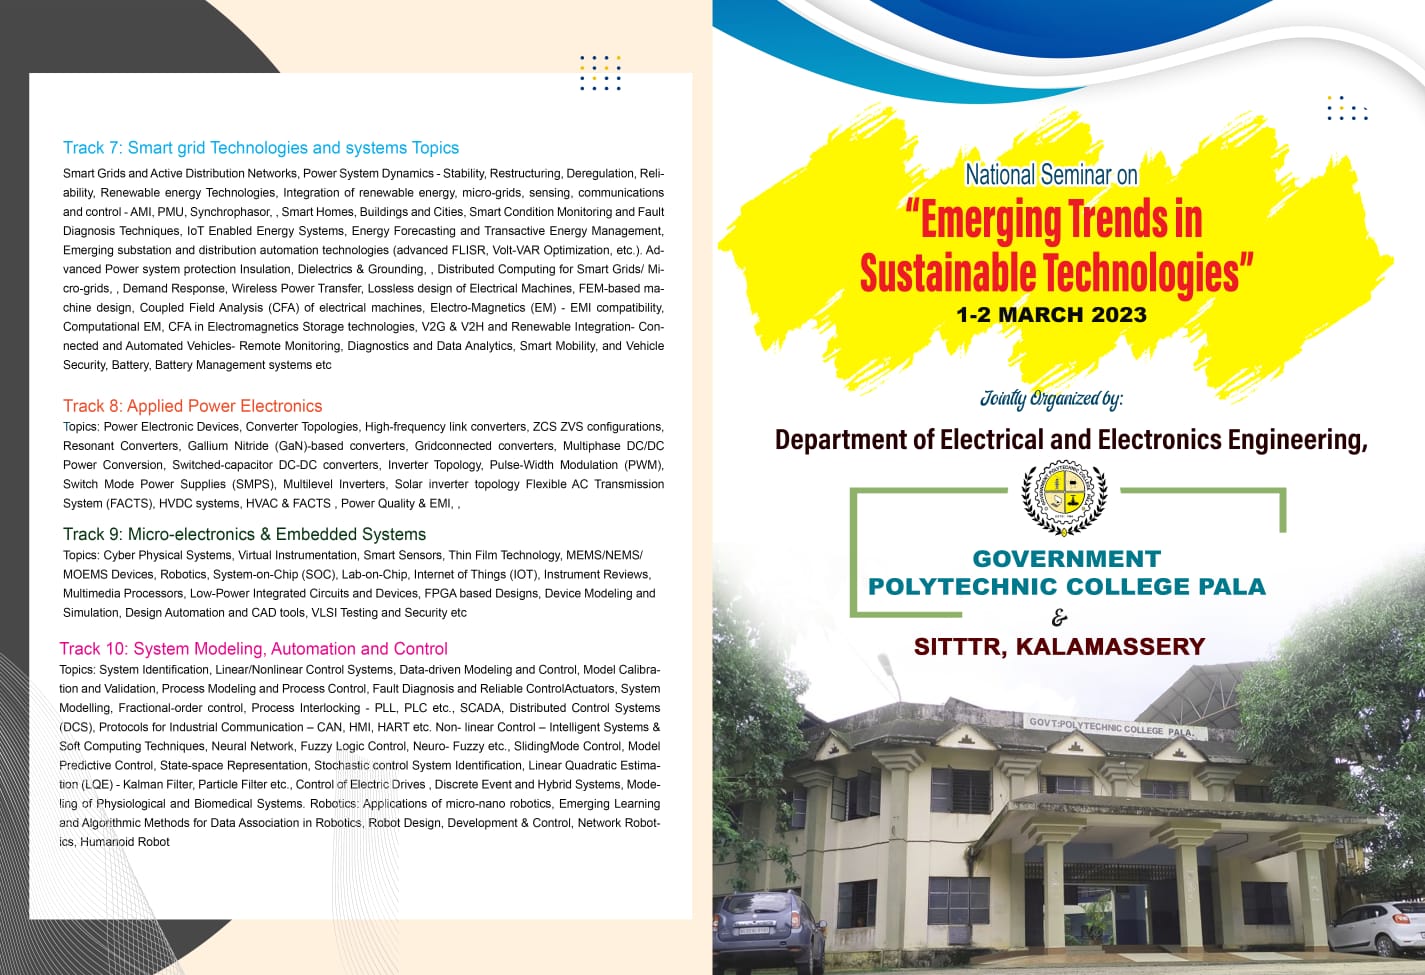 National Seminar on Emerging Trends in Sustainable Technologies, GPC Pala, March1-2 2023-Img1